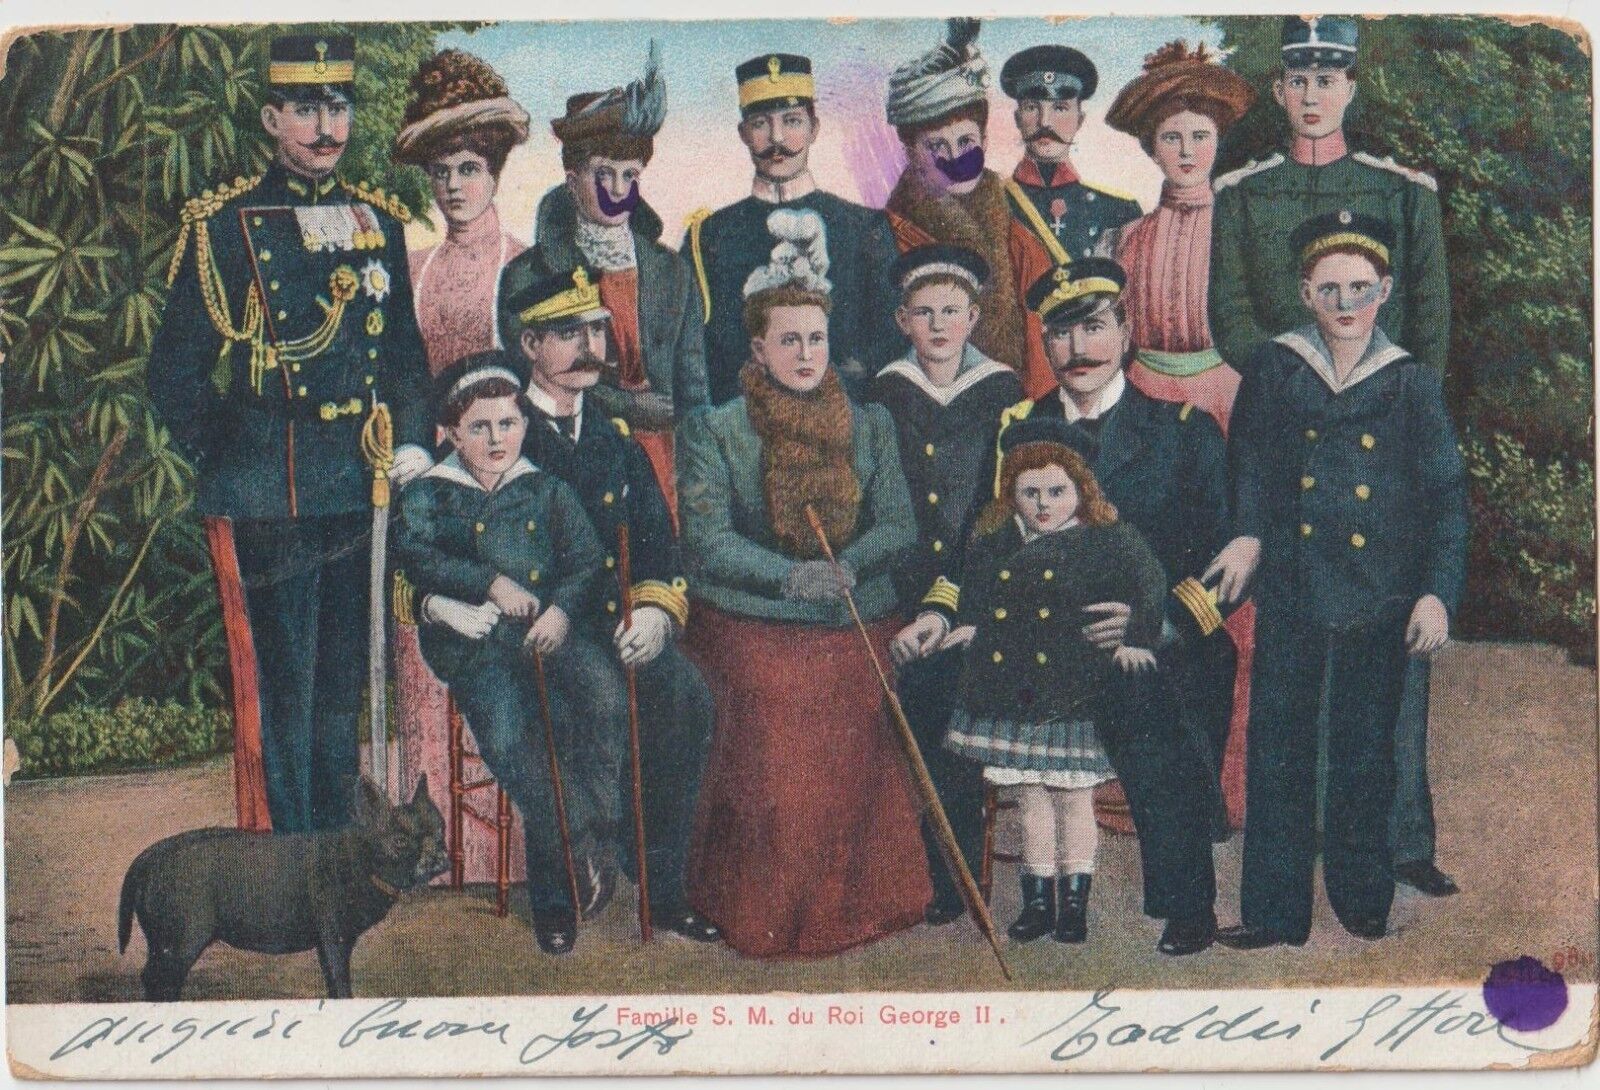 GREECE TURKEY 1903 FAMILY OF S.M.RE GIORGIO II POSTCARD  FROM CONSTANTINOPLE